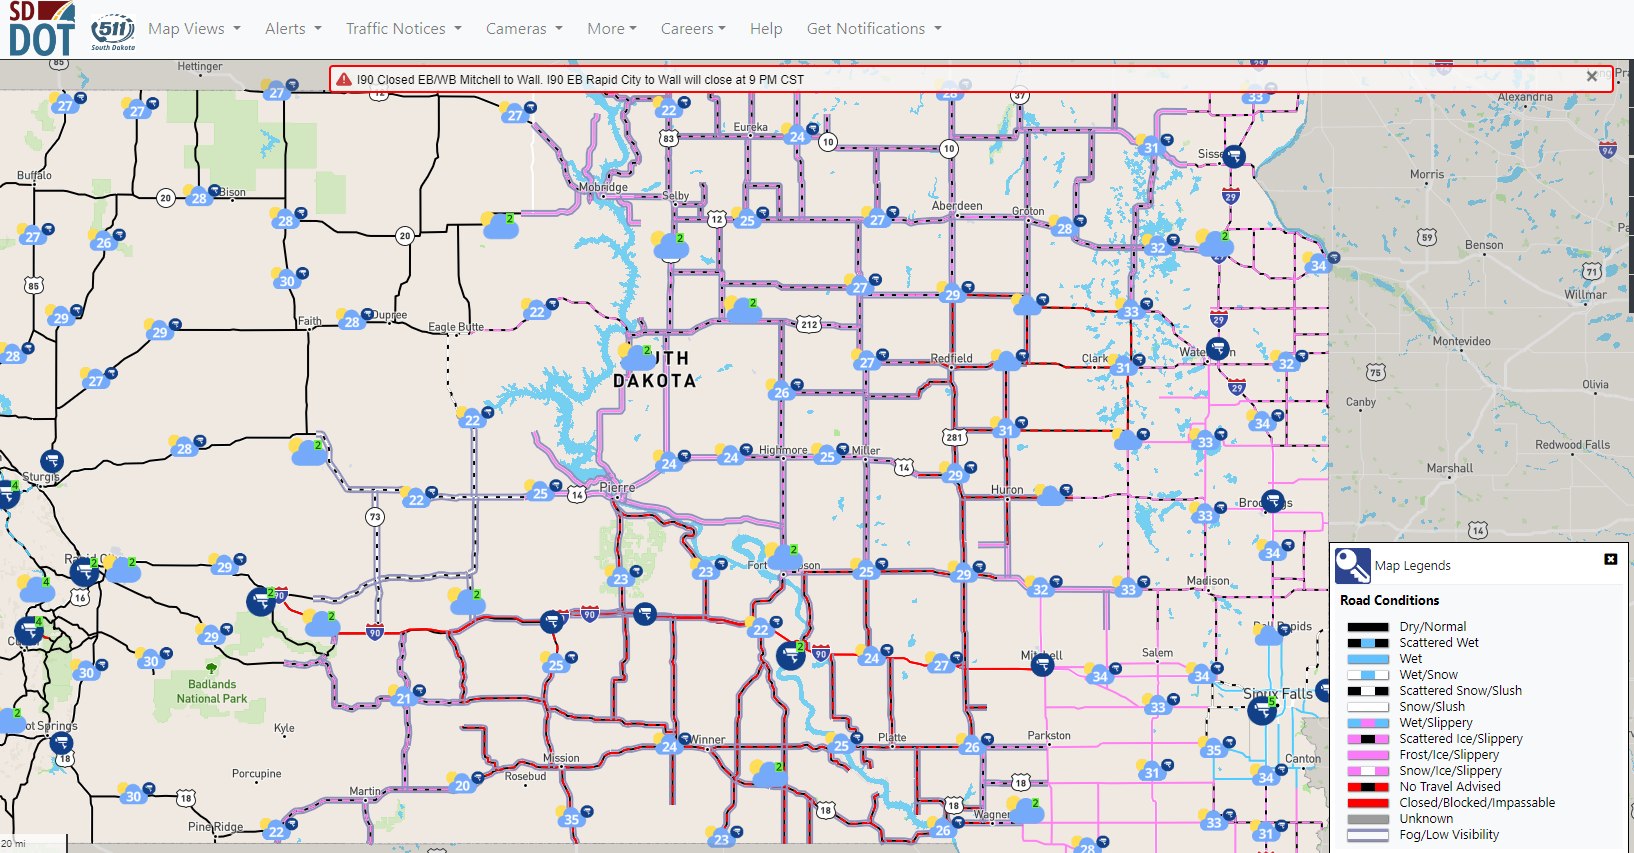 SDDOT Road Conditions at 6pm on December 25, 2023 (via SD511.org)